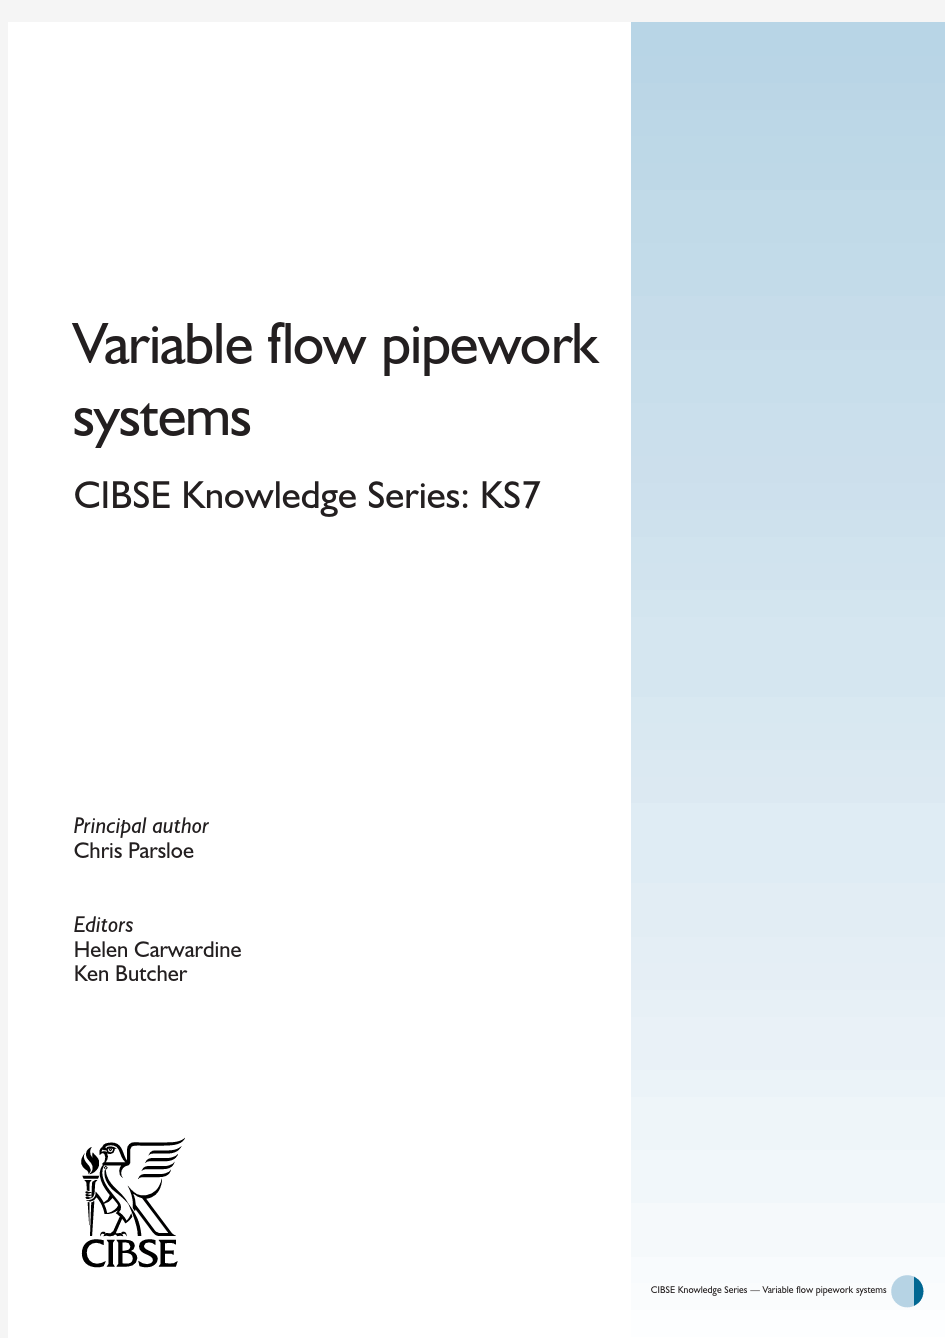 CIBSE Knowledge Variable Pipework Systems